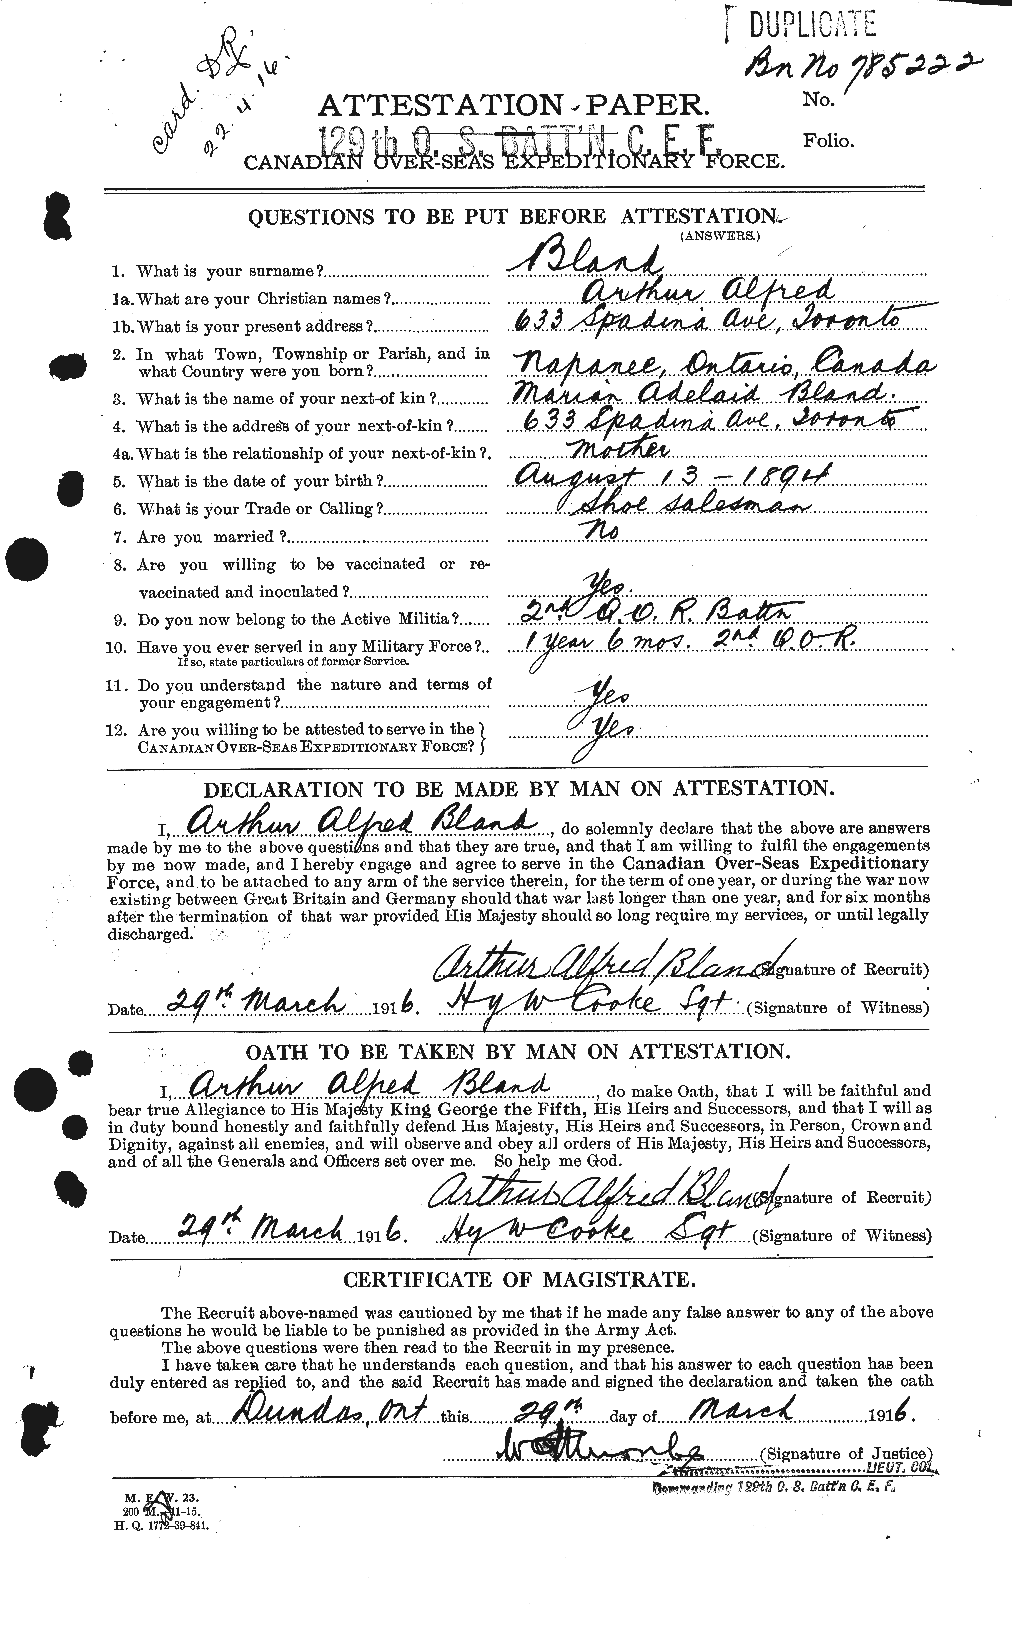 Personnel Records of the First World War - CEF 240617a